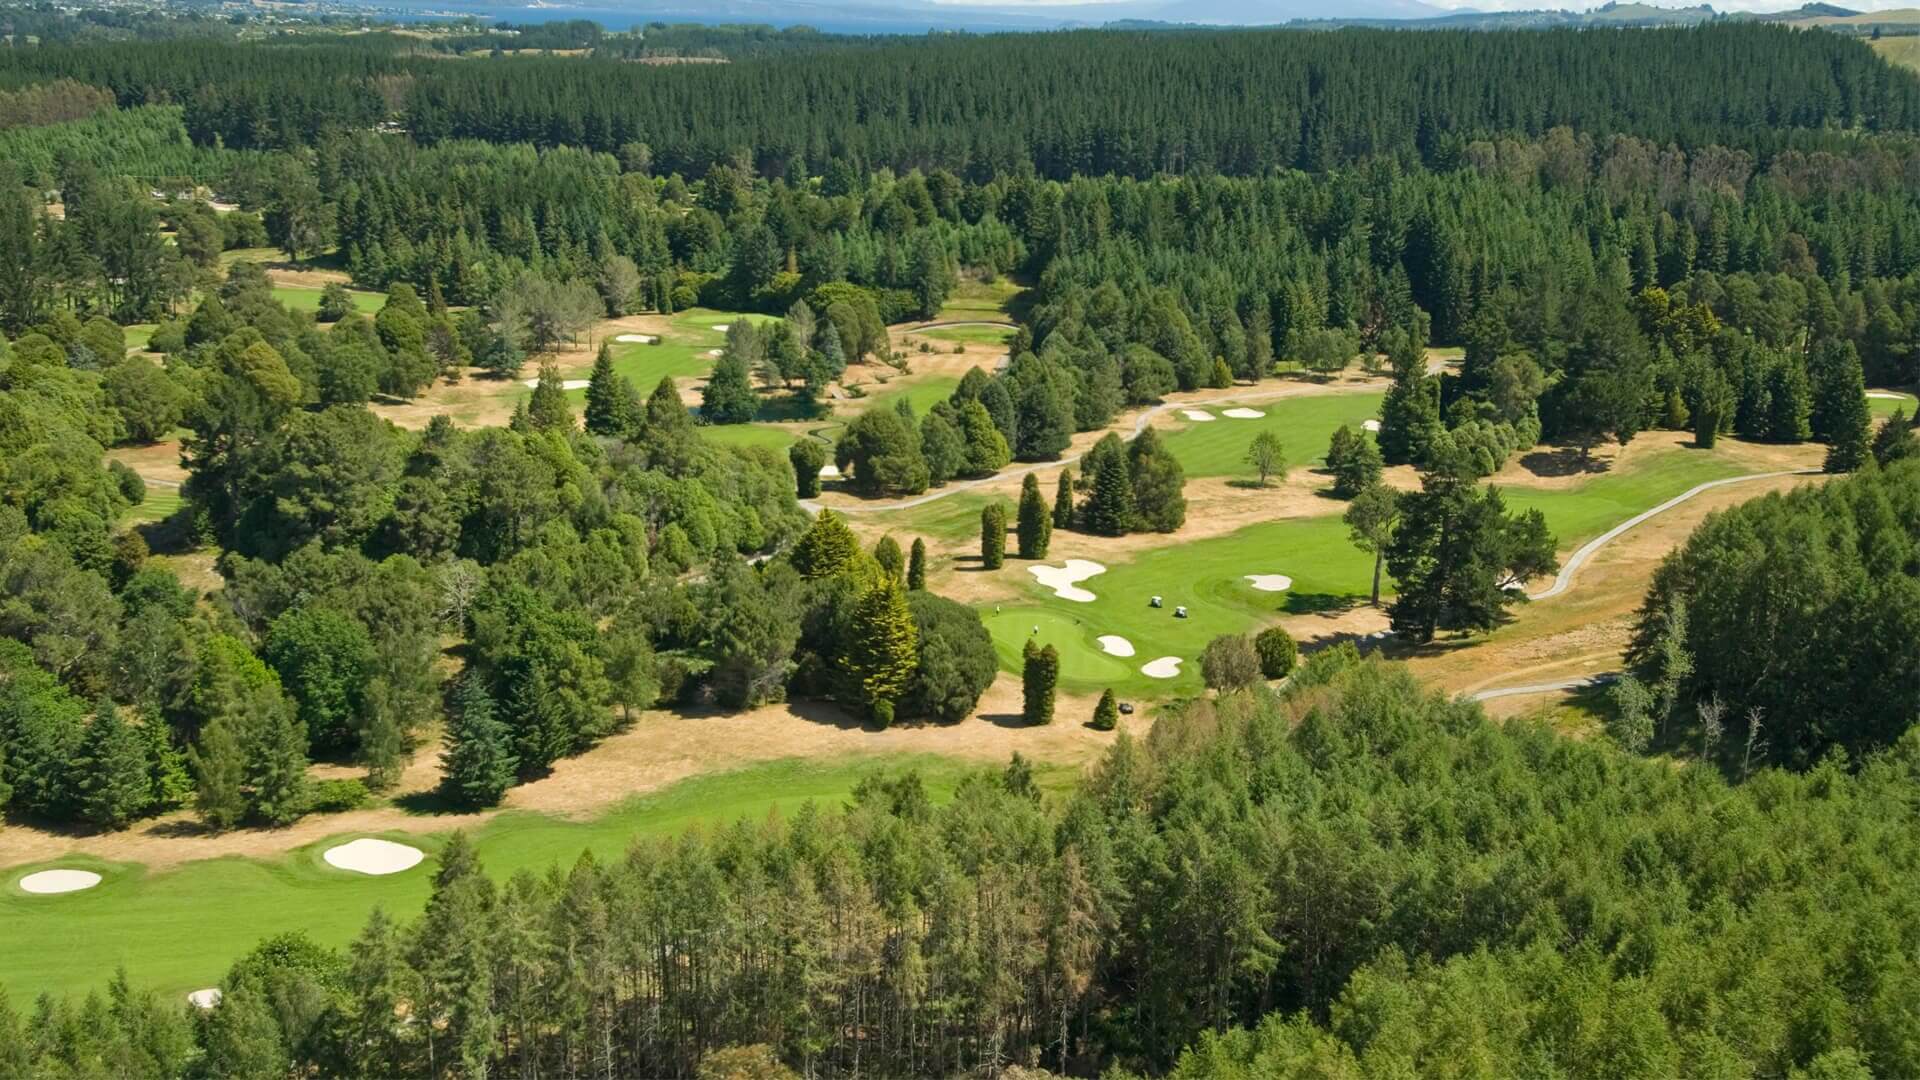 Wairakei golf course amongst heavily forested landscape